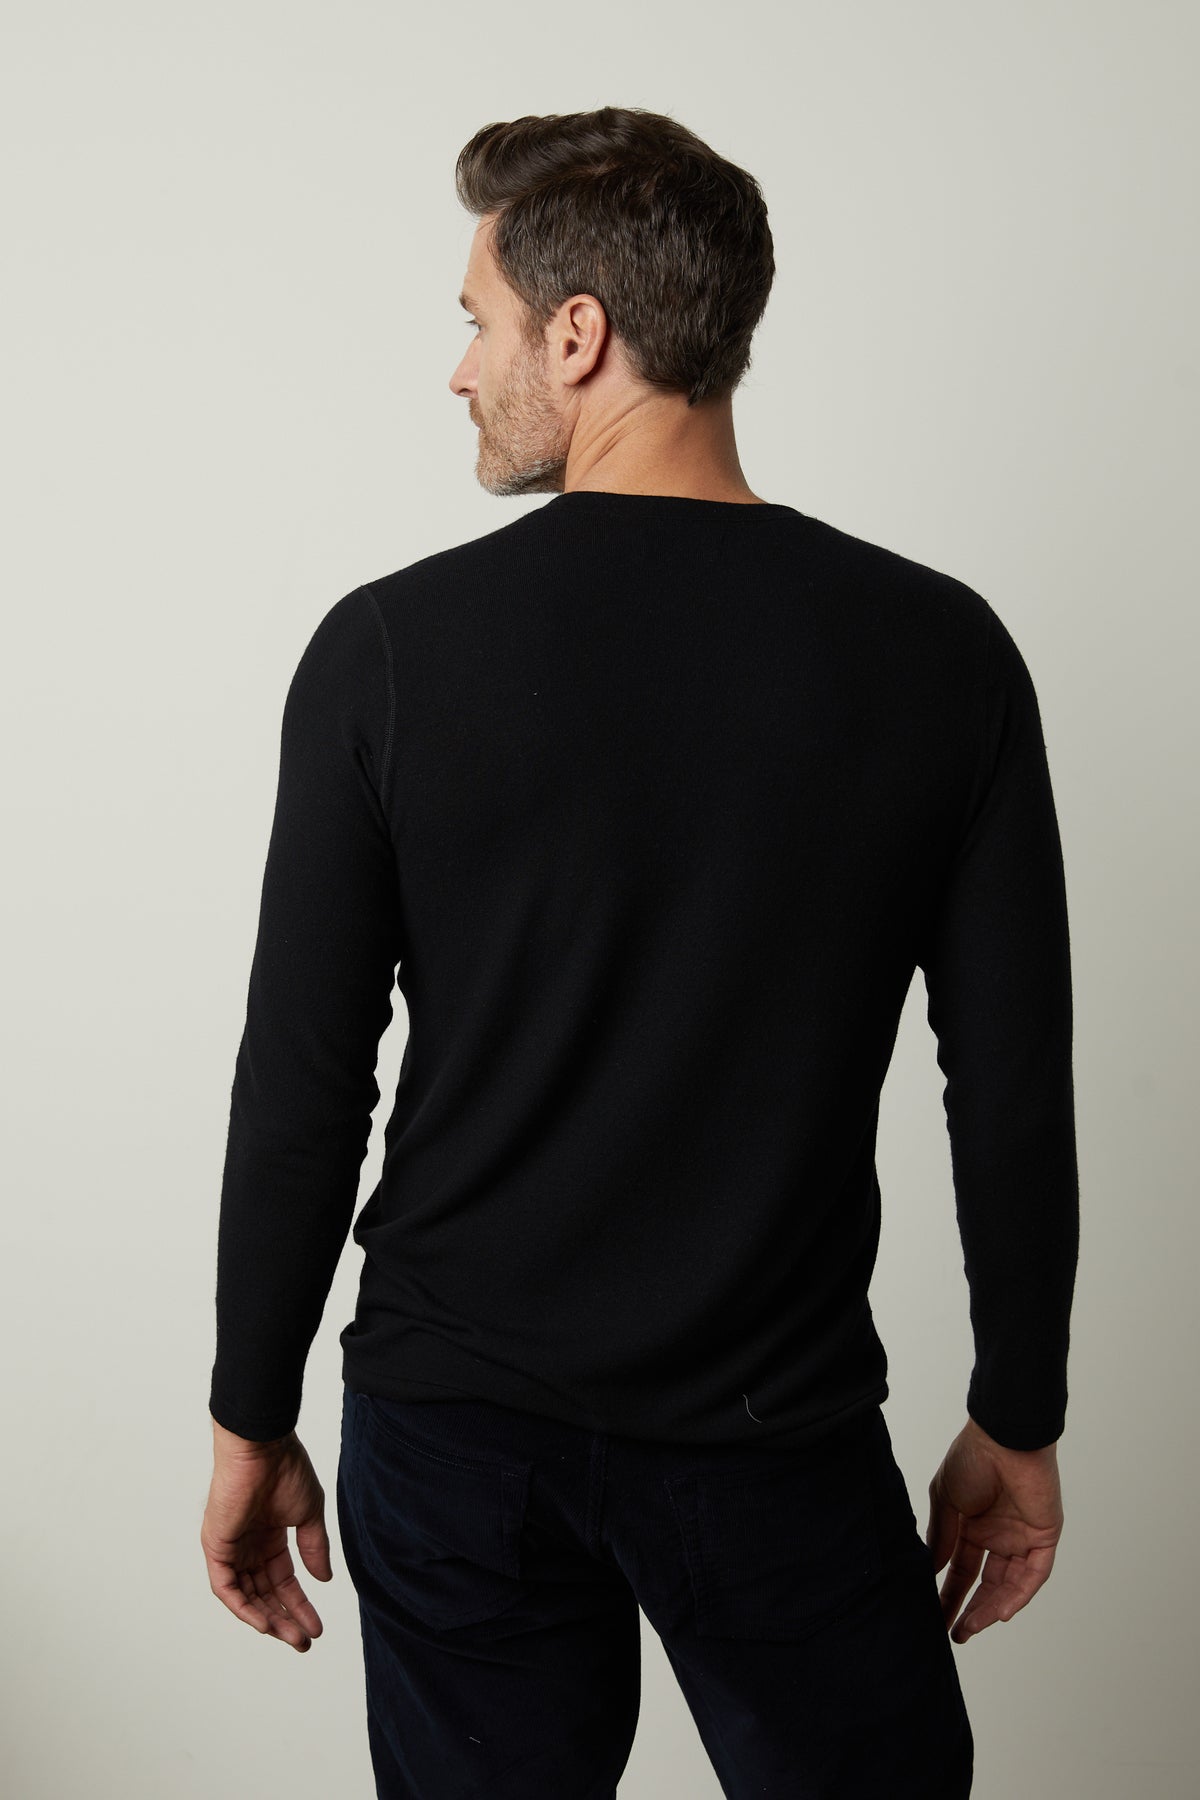 The back view of a man wearing a Velvet by Graham & Spencer RYLAND HENLEY made with a cozy jersey fabrication.-35783115243713